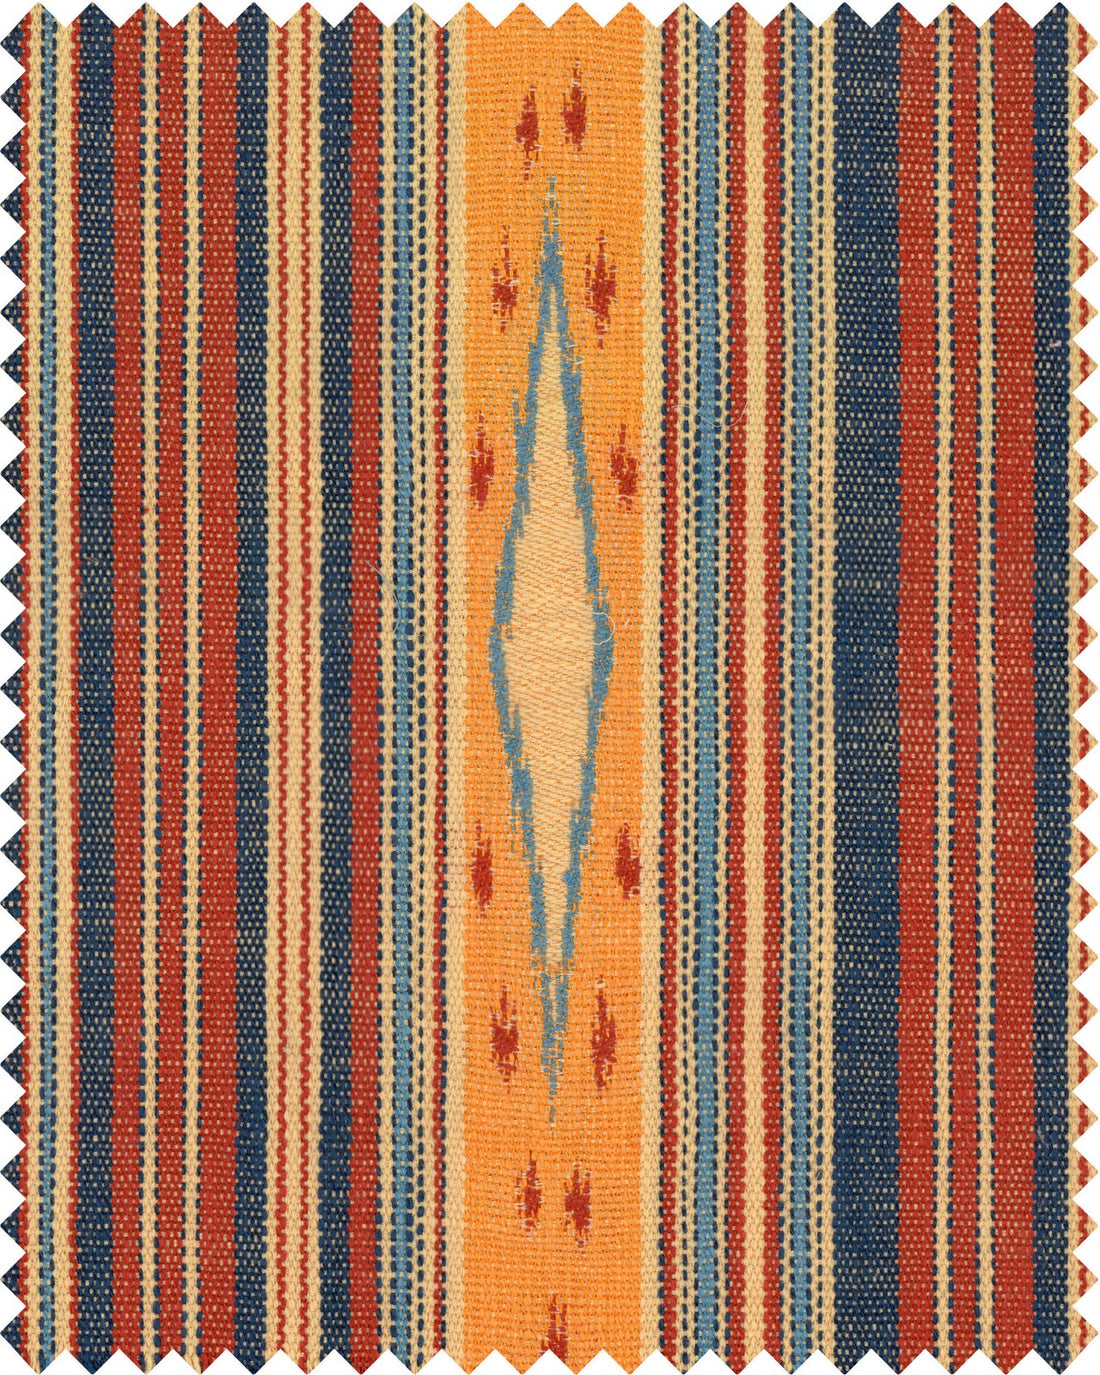 Neyshabour fabric in red blue yellow taupe color - pattern number FB00083 - by Mind The Gap in the Woodstock collection